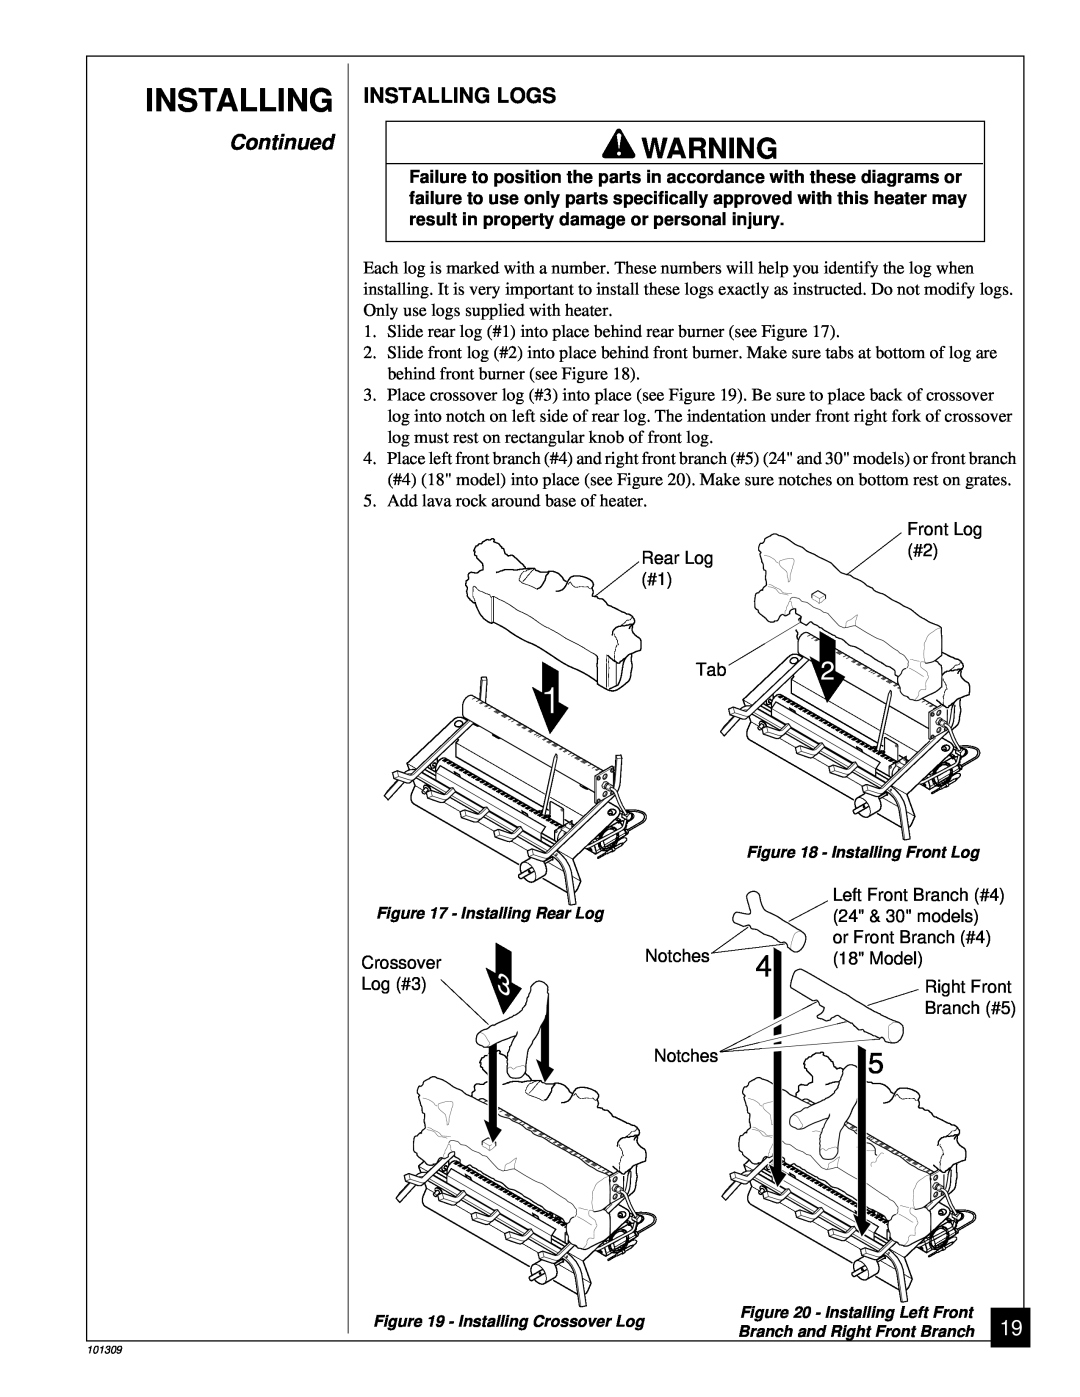 Desa UNVENTED (VENT-FREE) PROPANE GAS LOG HEATER installation manual Continued, Installing Logs 